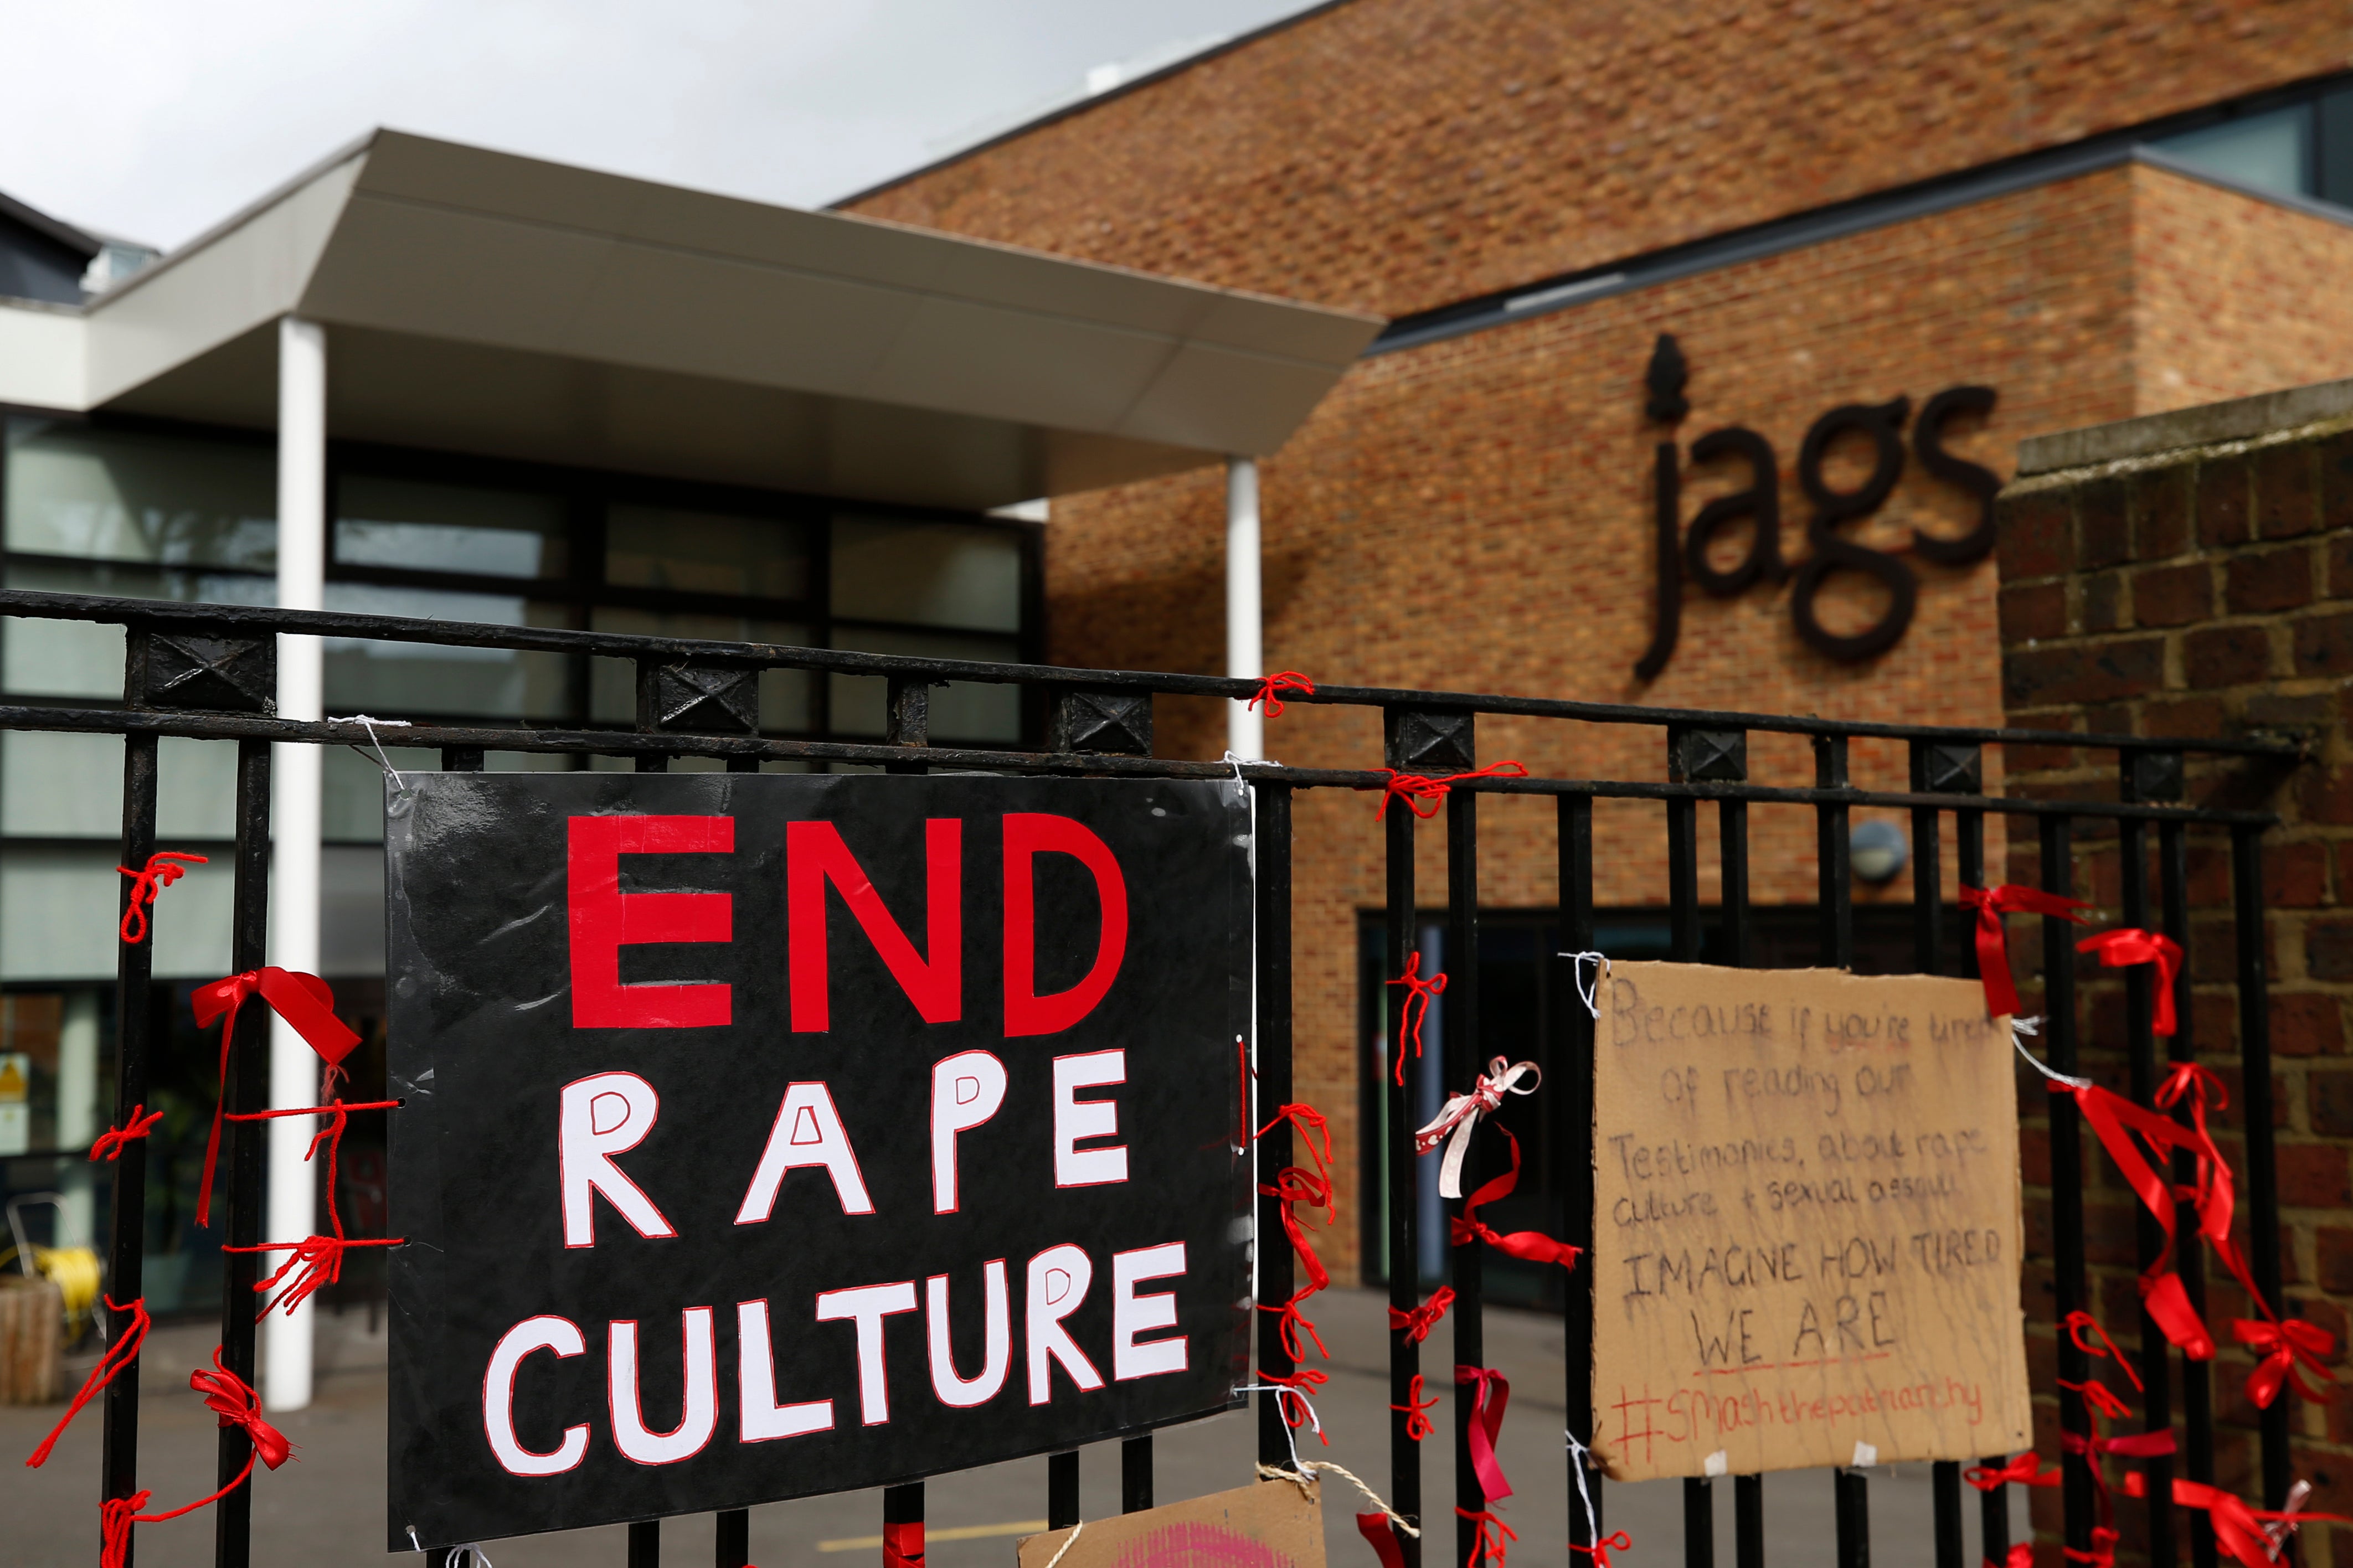 Some schools have said they will take action following sexual assualt allegations